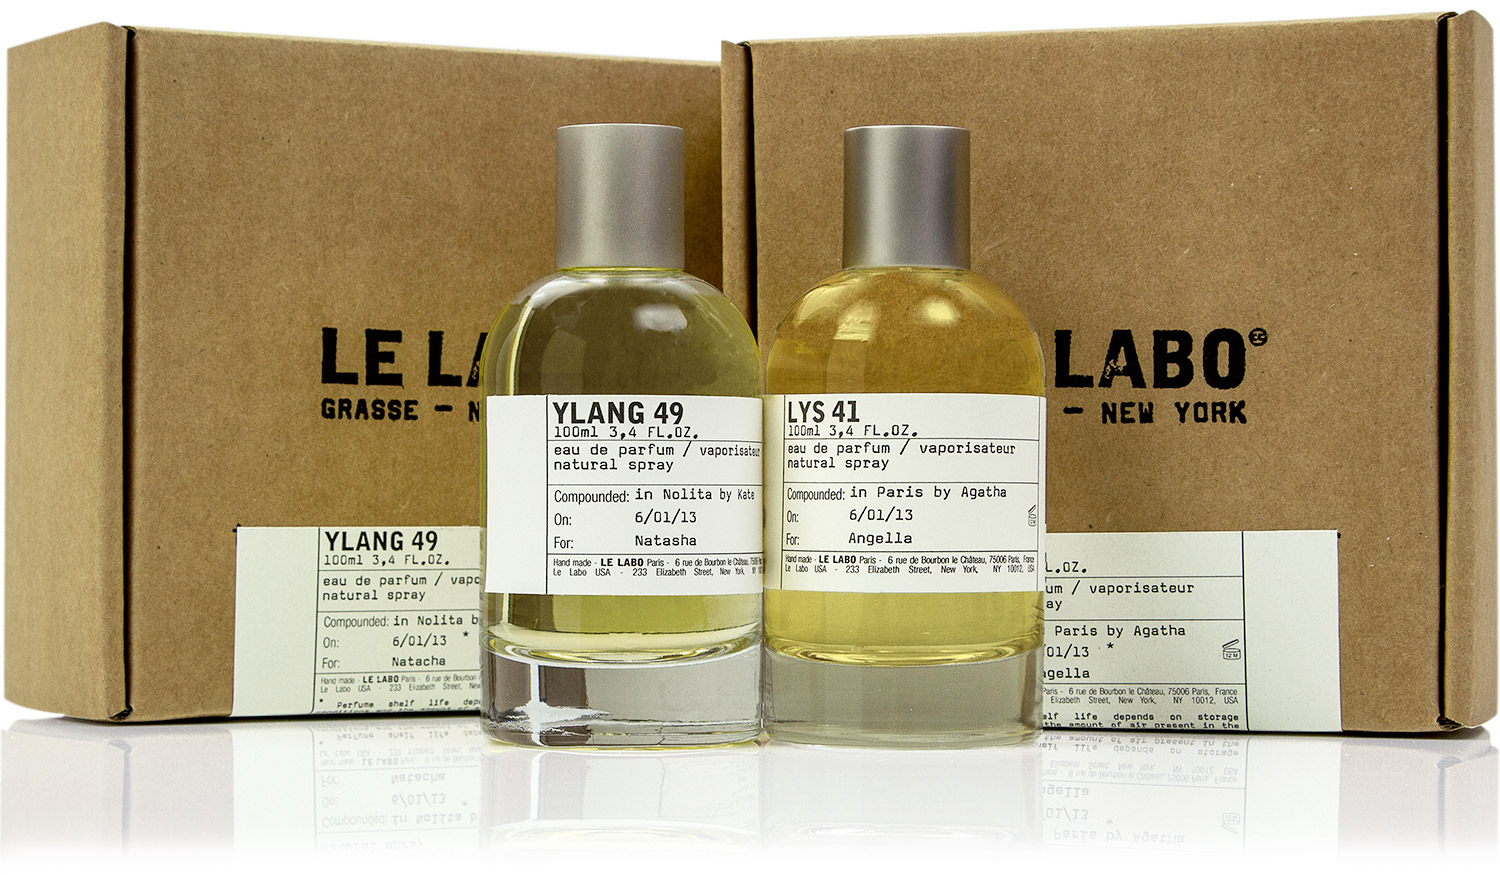 Lys 41 Le Labo perfume - a new fragrance for women 2013